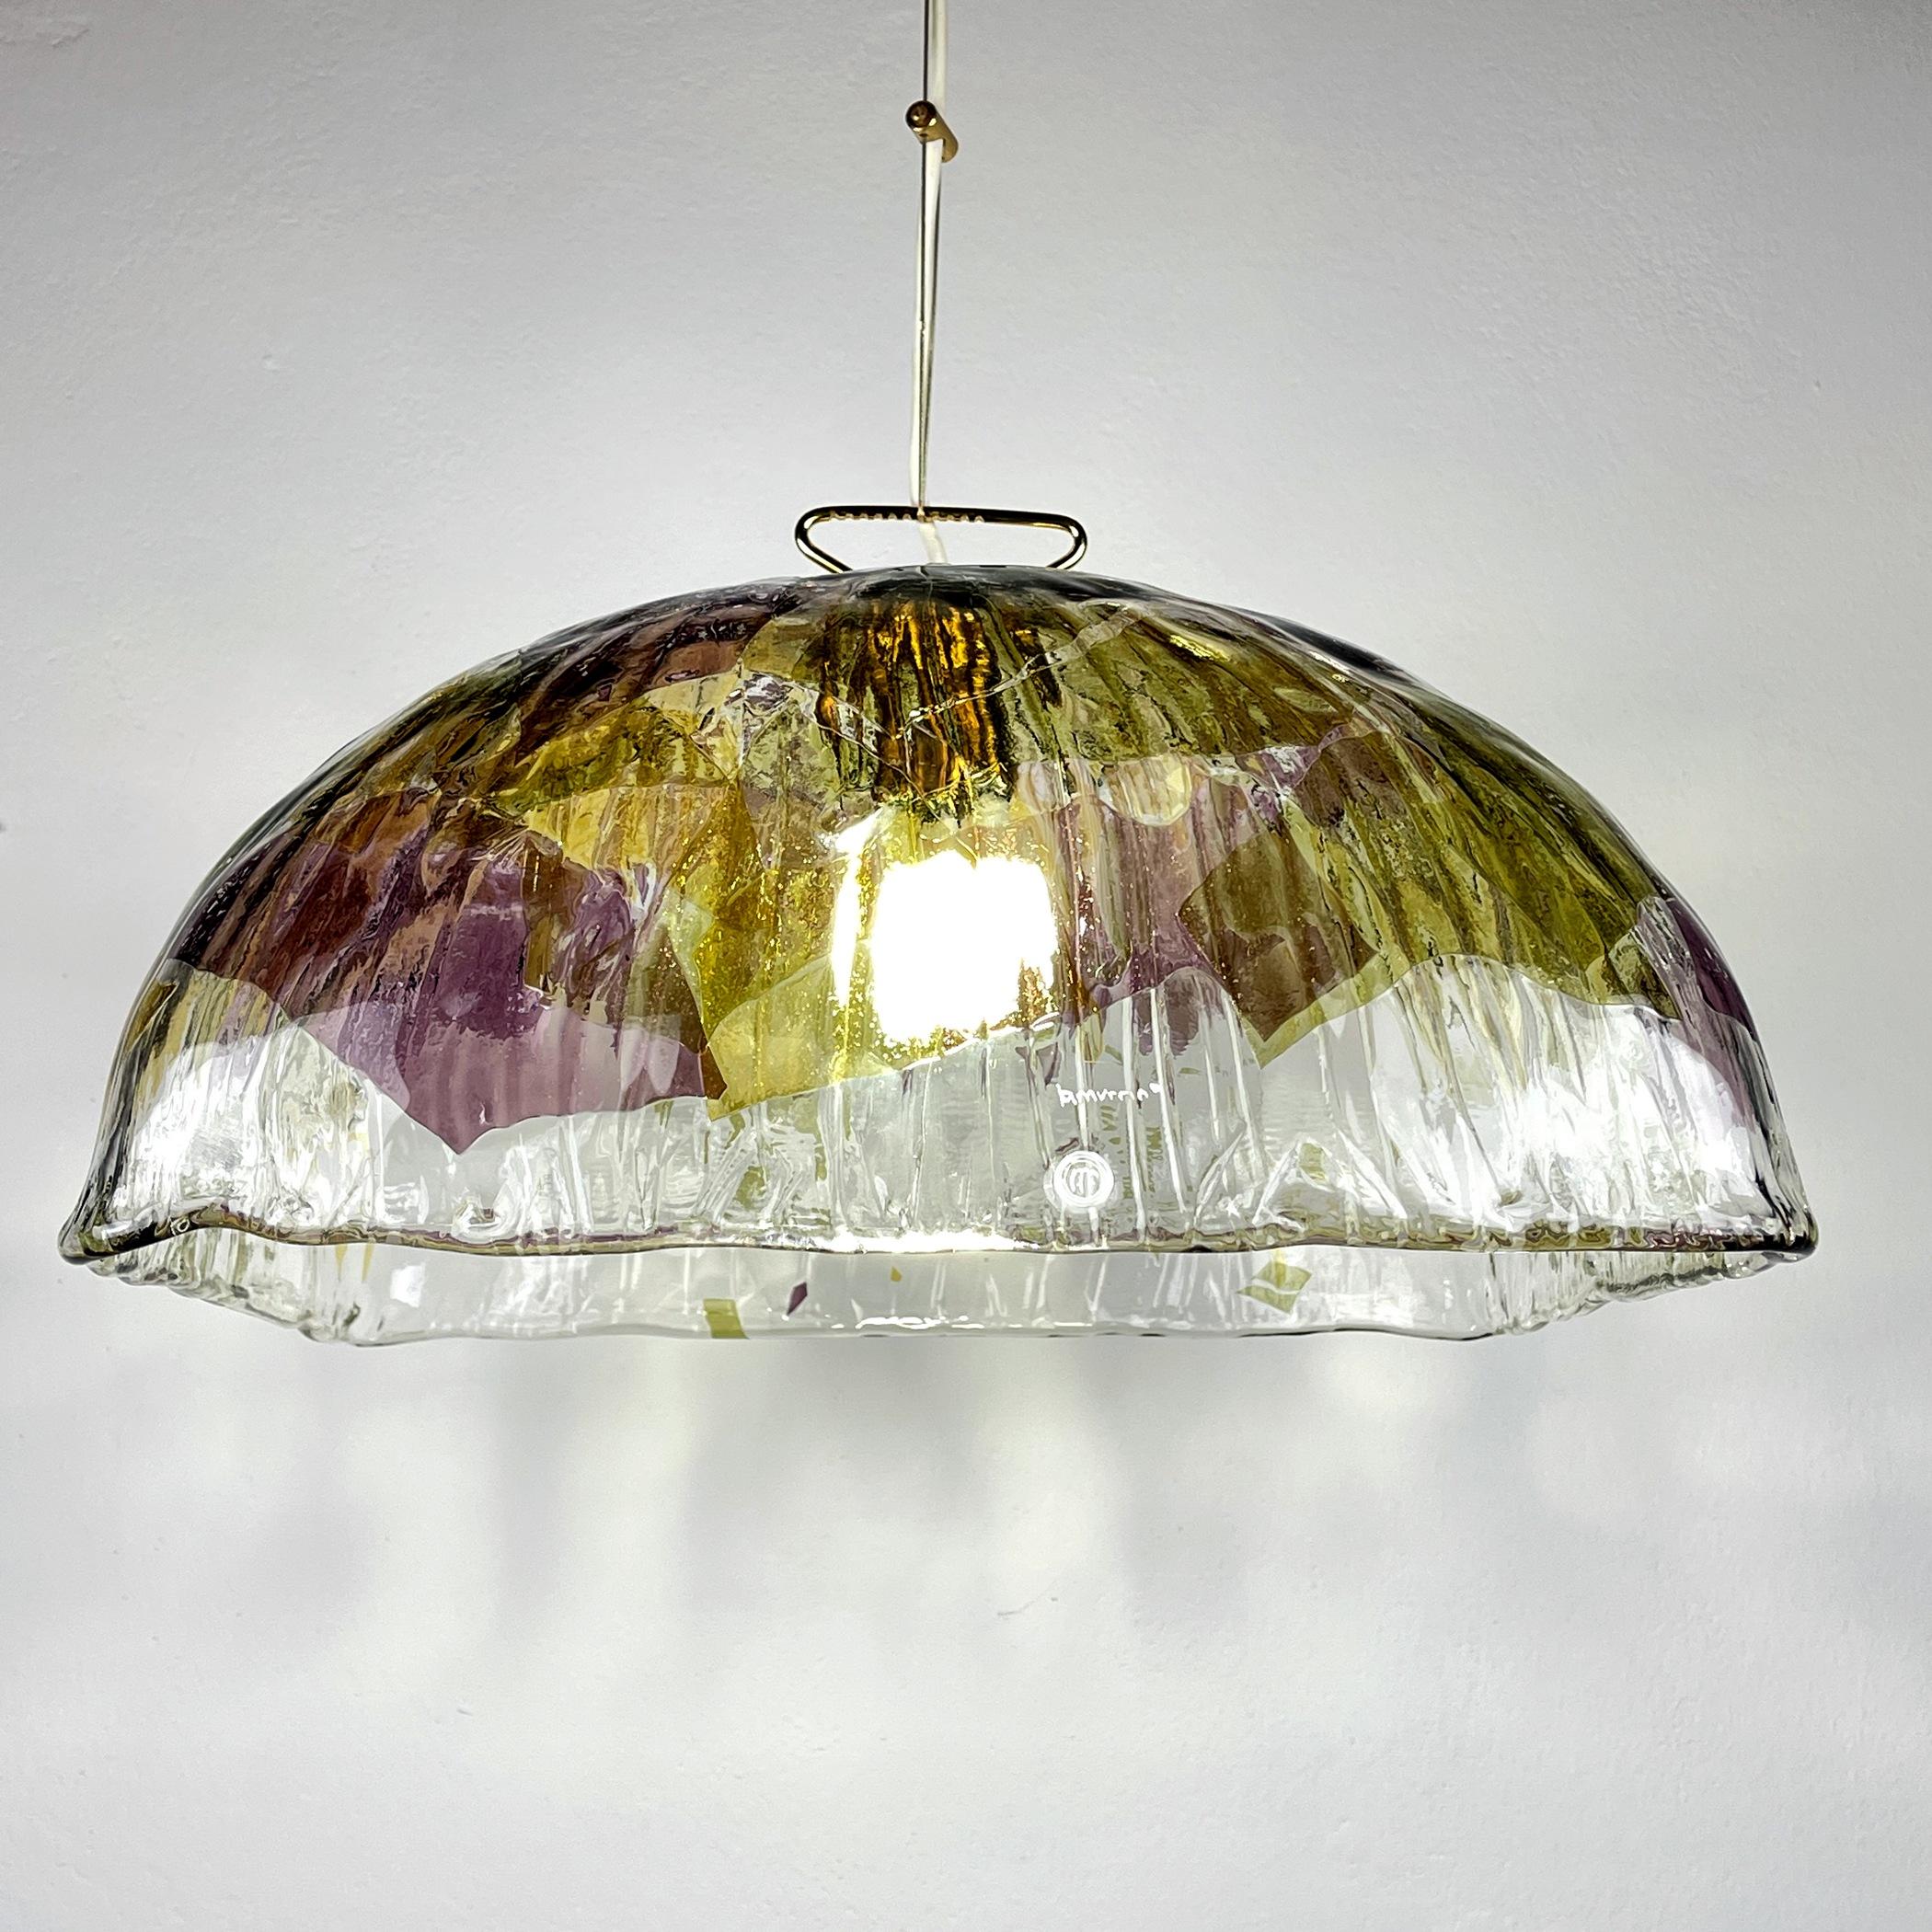 The beautiful vintage large murano pendant lamp by manufacture 